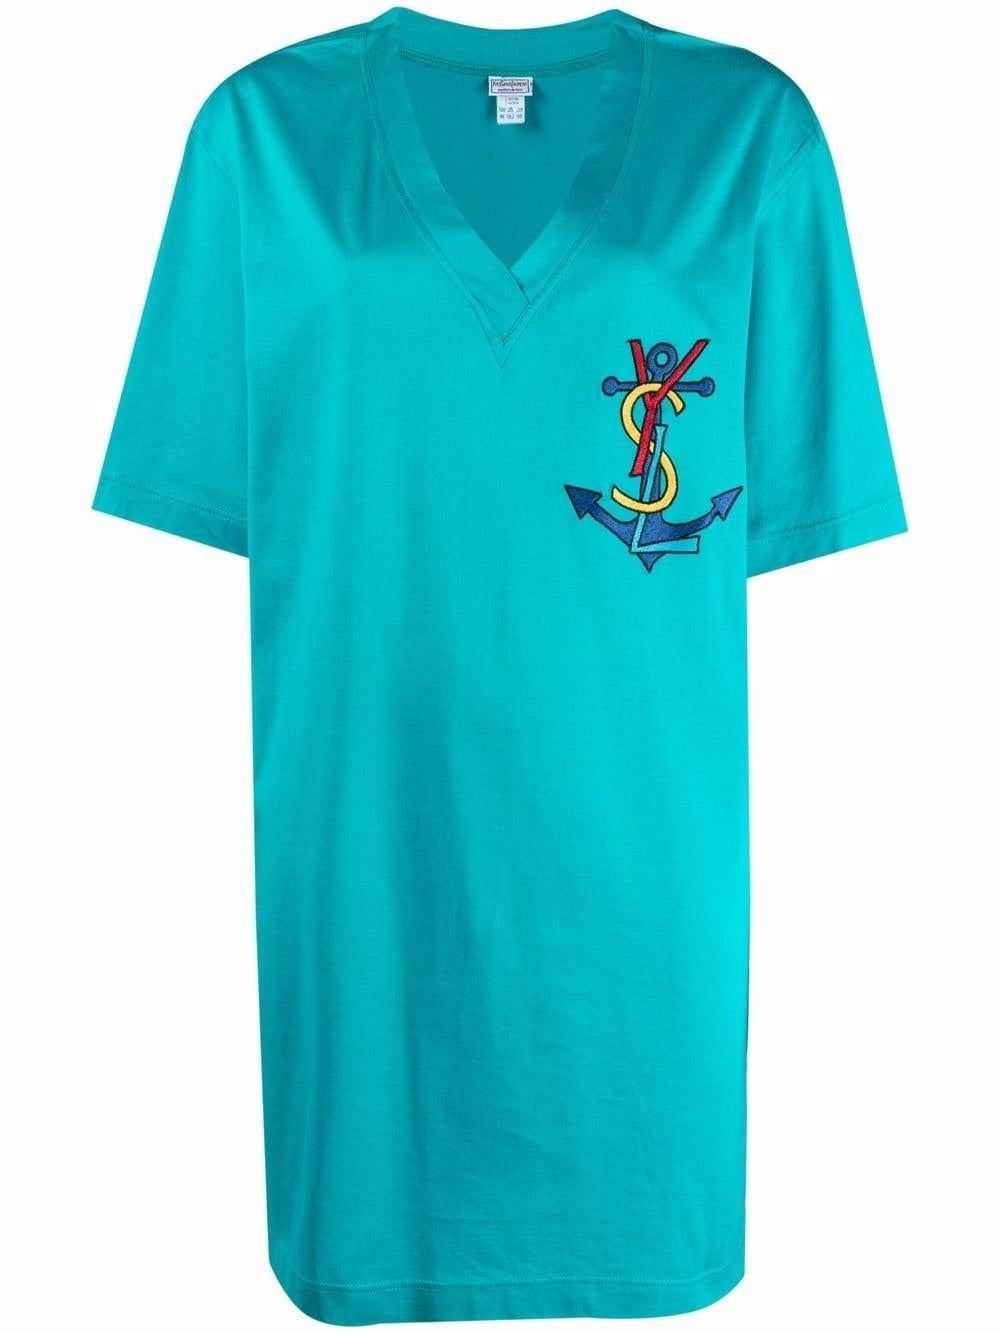 Yves Saint Laurent YSL turquoise blue cotton dress featuring a multi embroidered front logo detail, a short length with sides slits, a V front neck. 
100% Cotton
Estimated size Estimated size 38fr/US6 /UK10
In good vintage condition. 
Made in